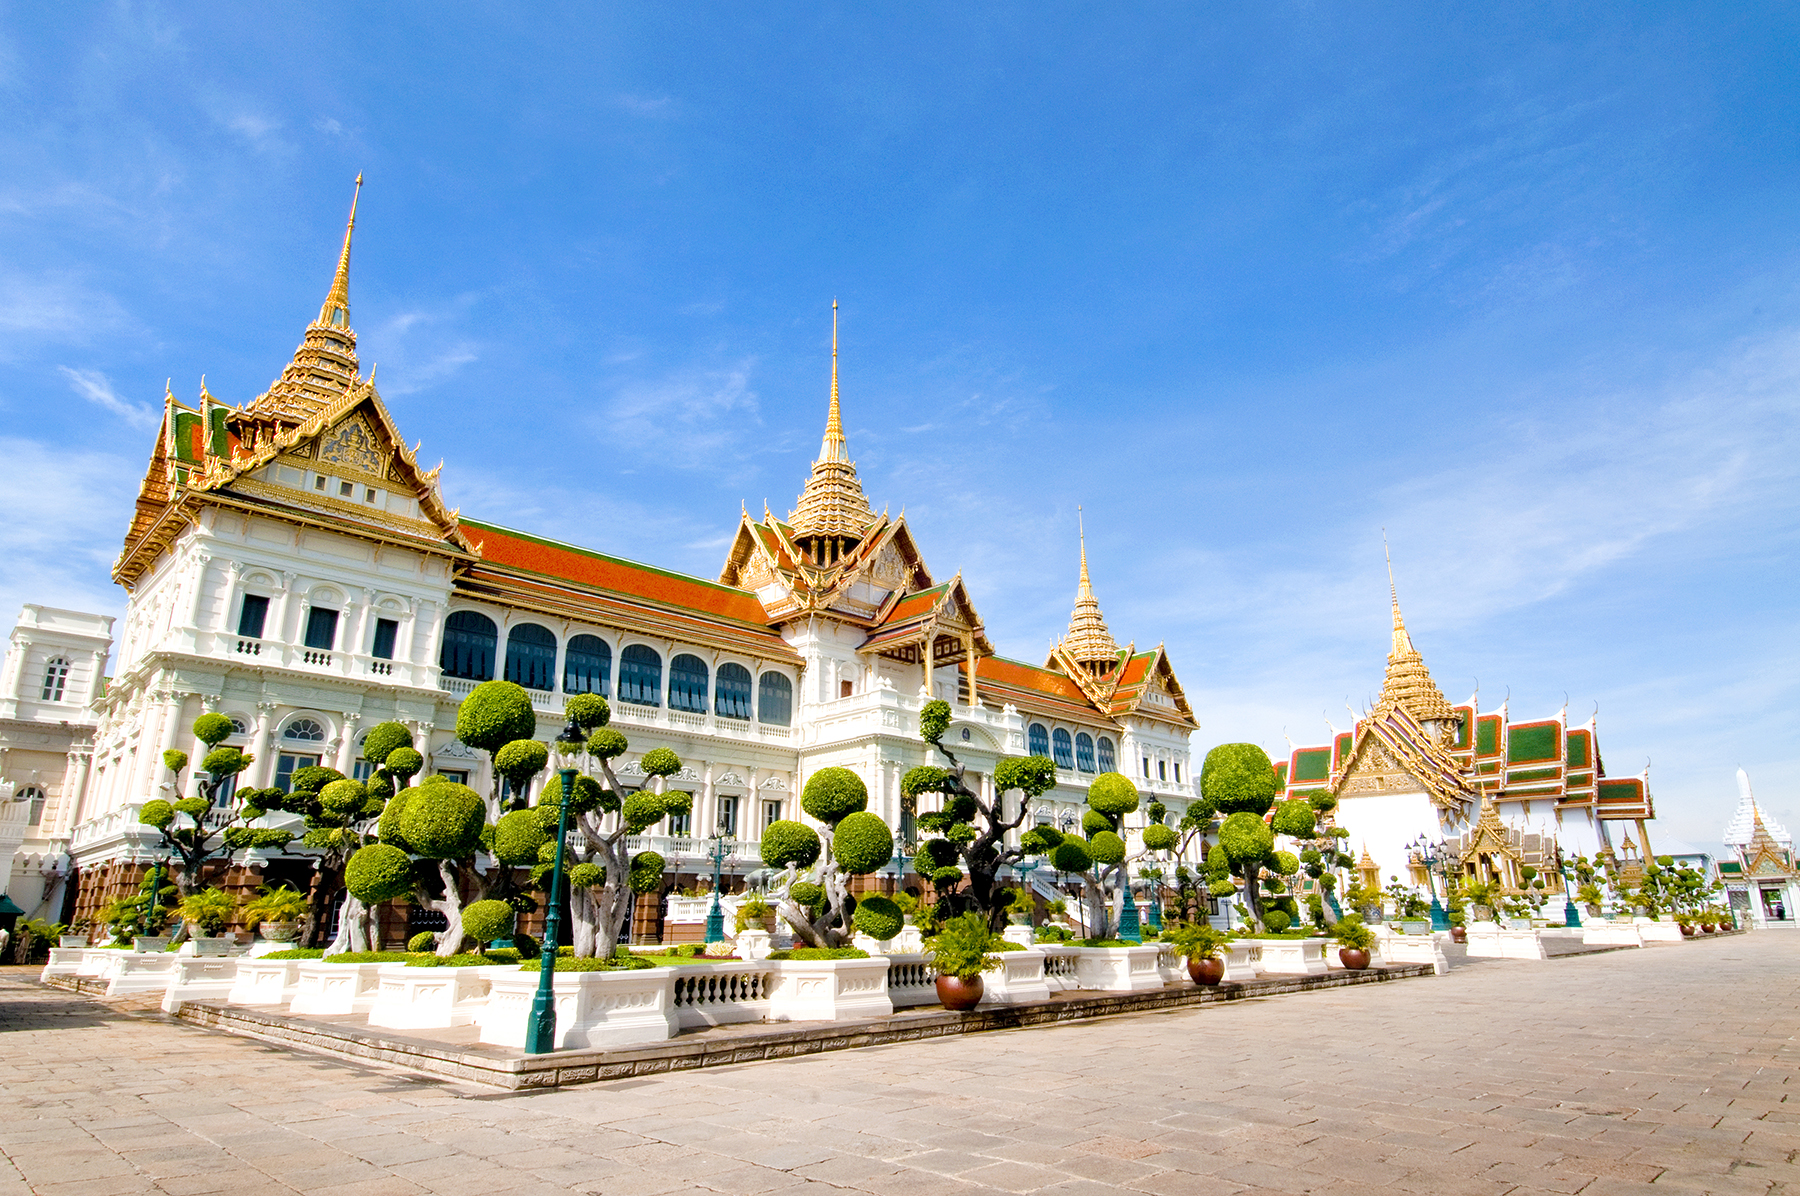 Things to do and see when in Bangkok, Thailand